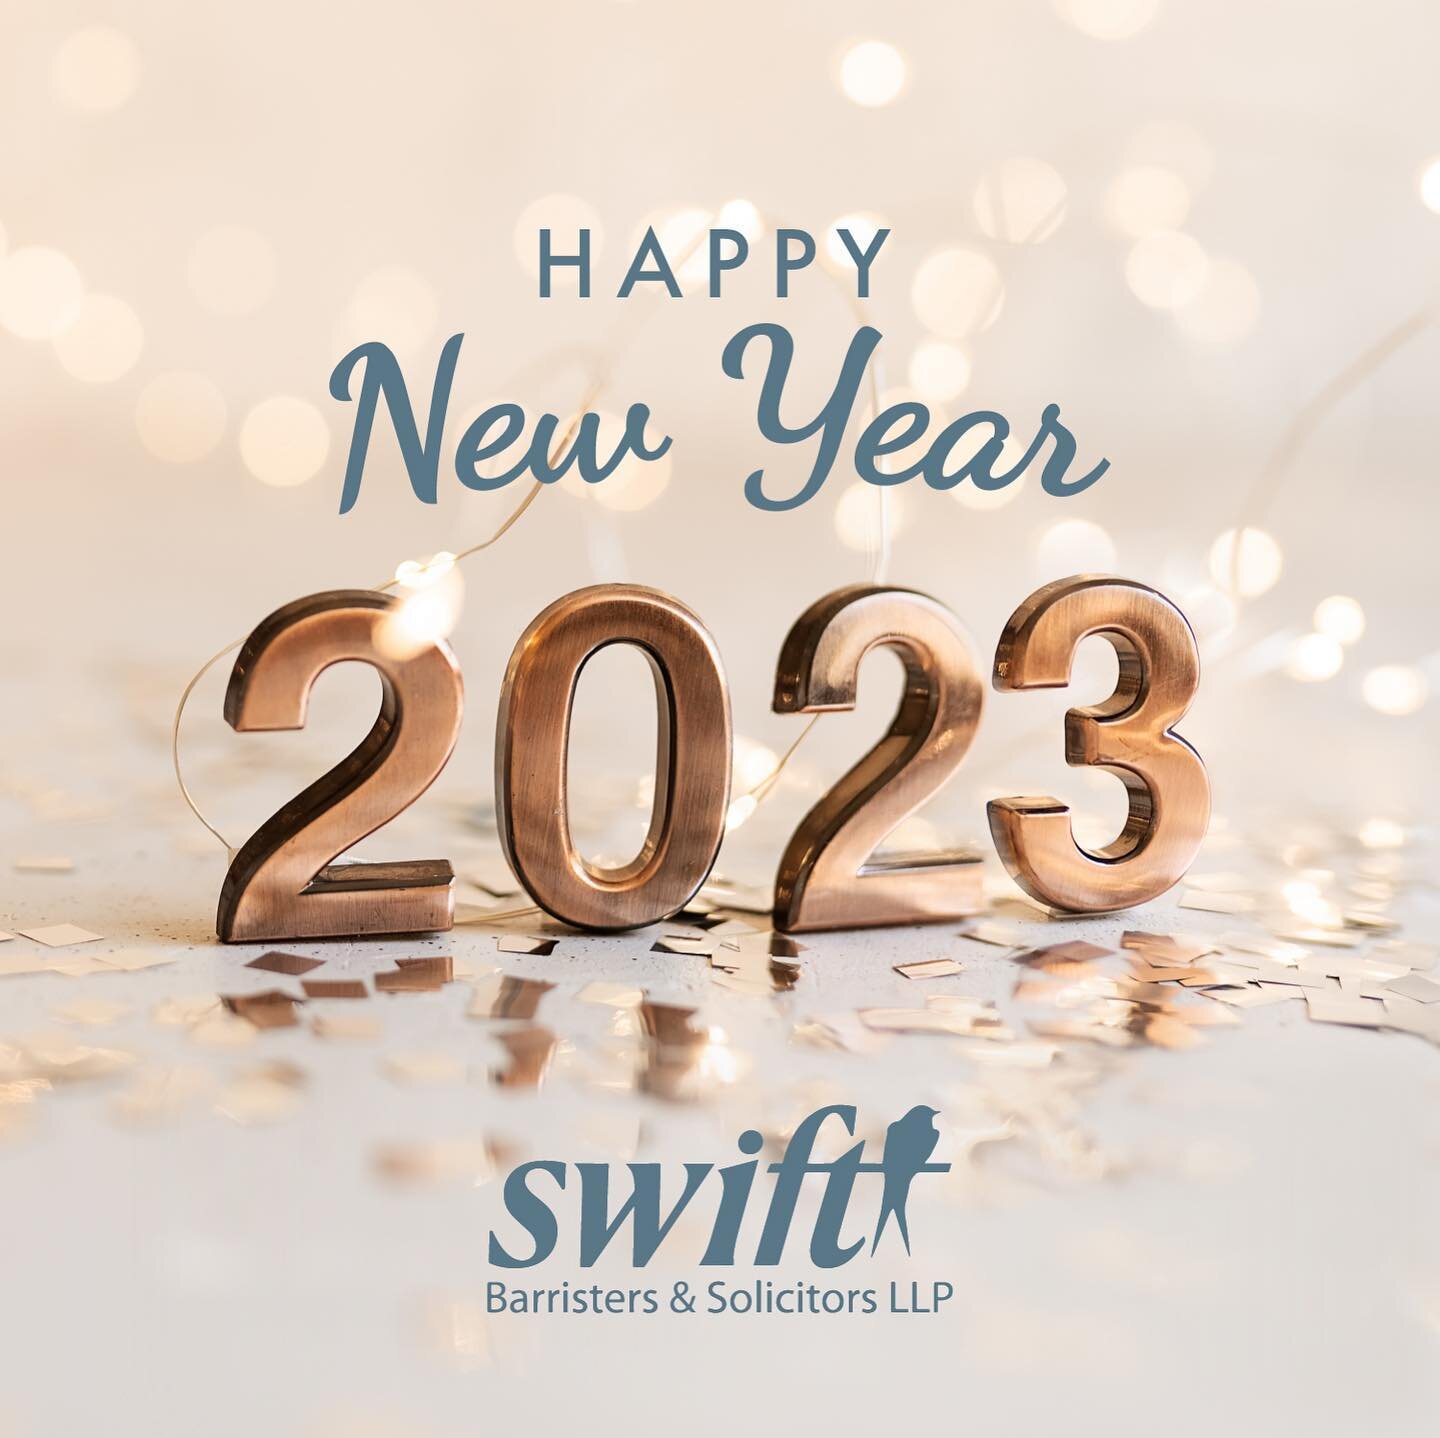 Wishing all our clients and referral partners a Happy New Year.